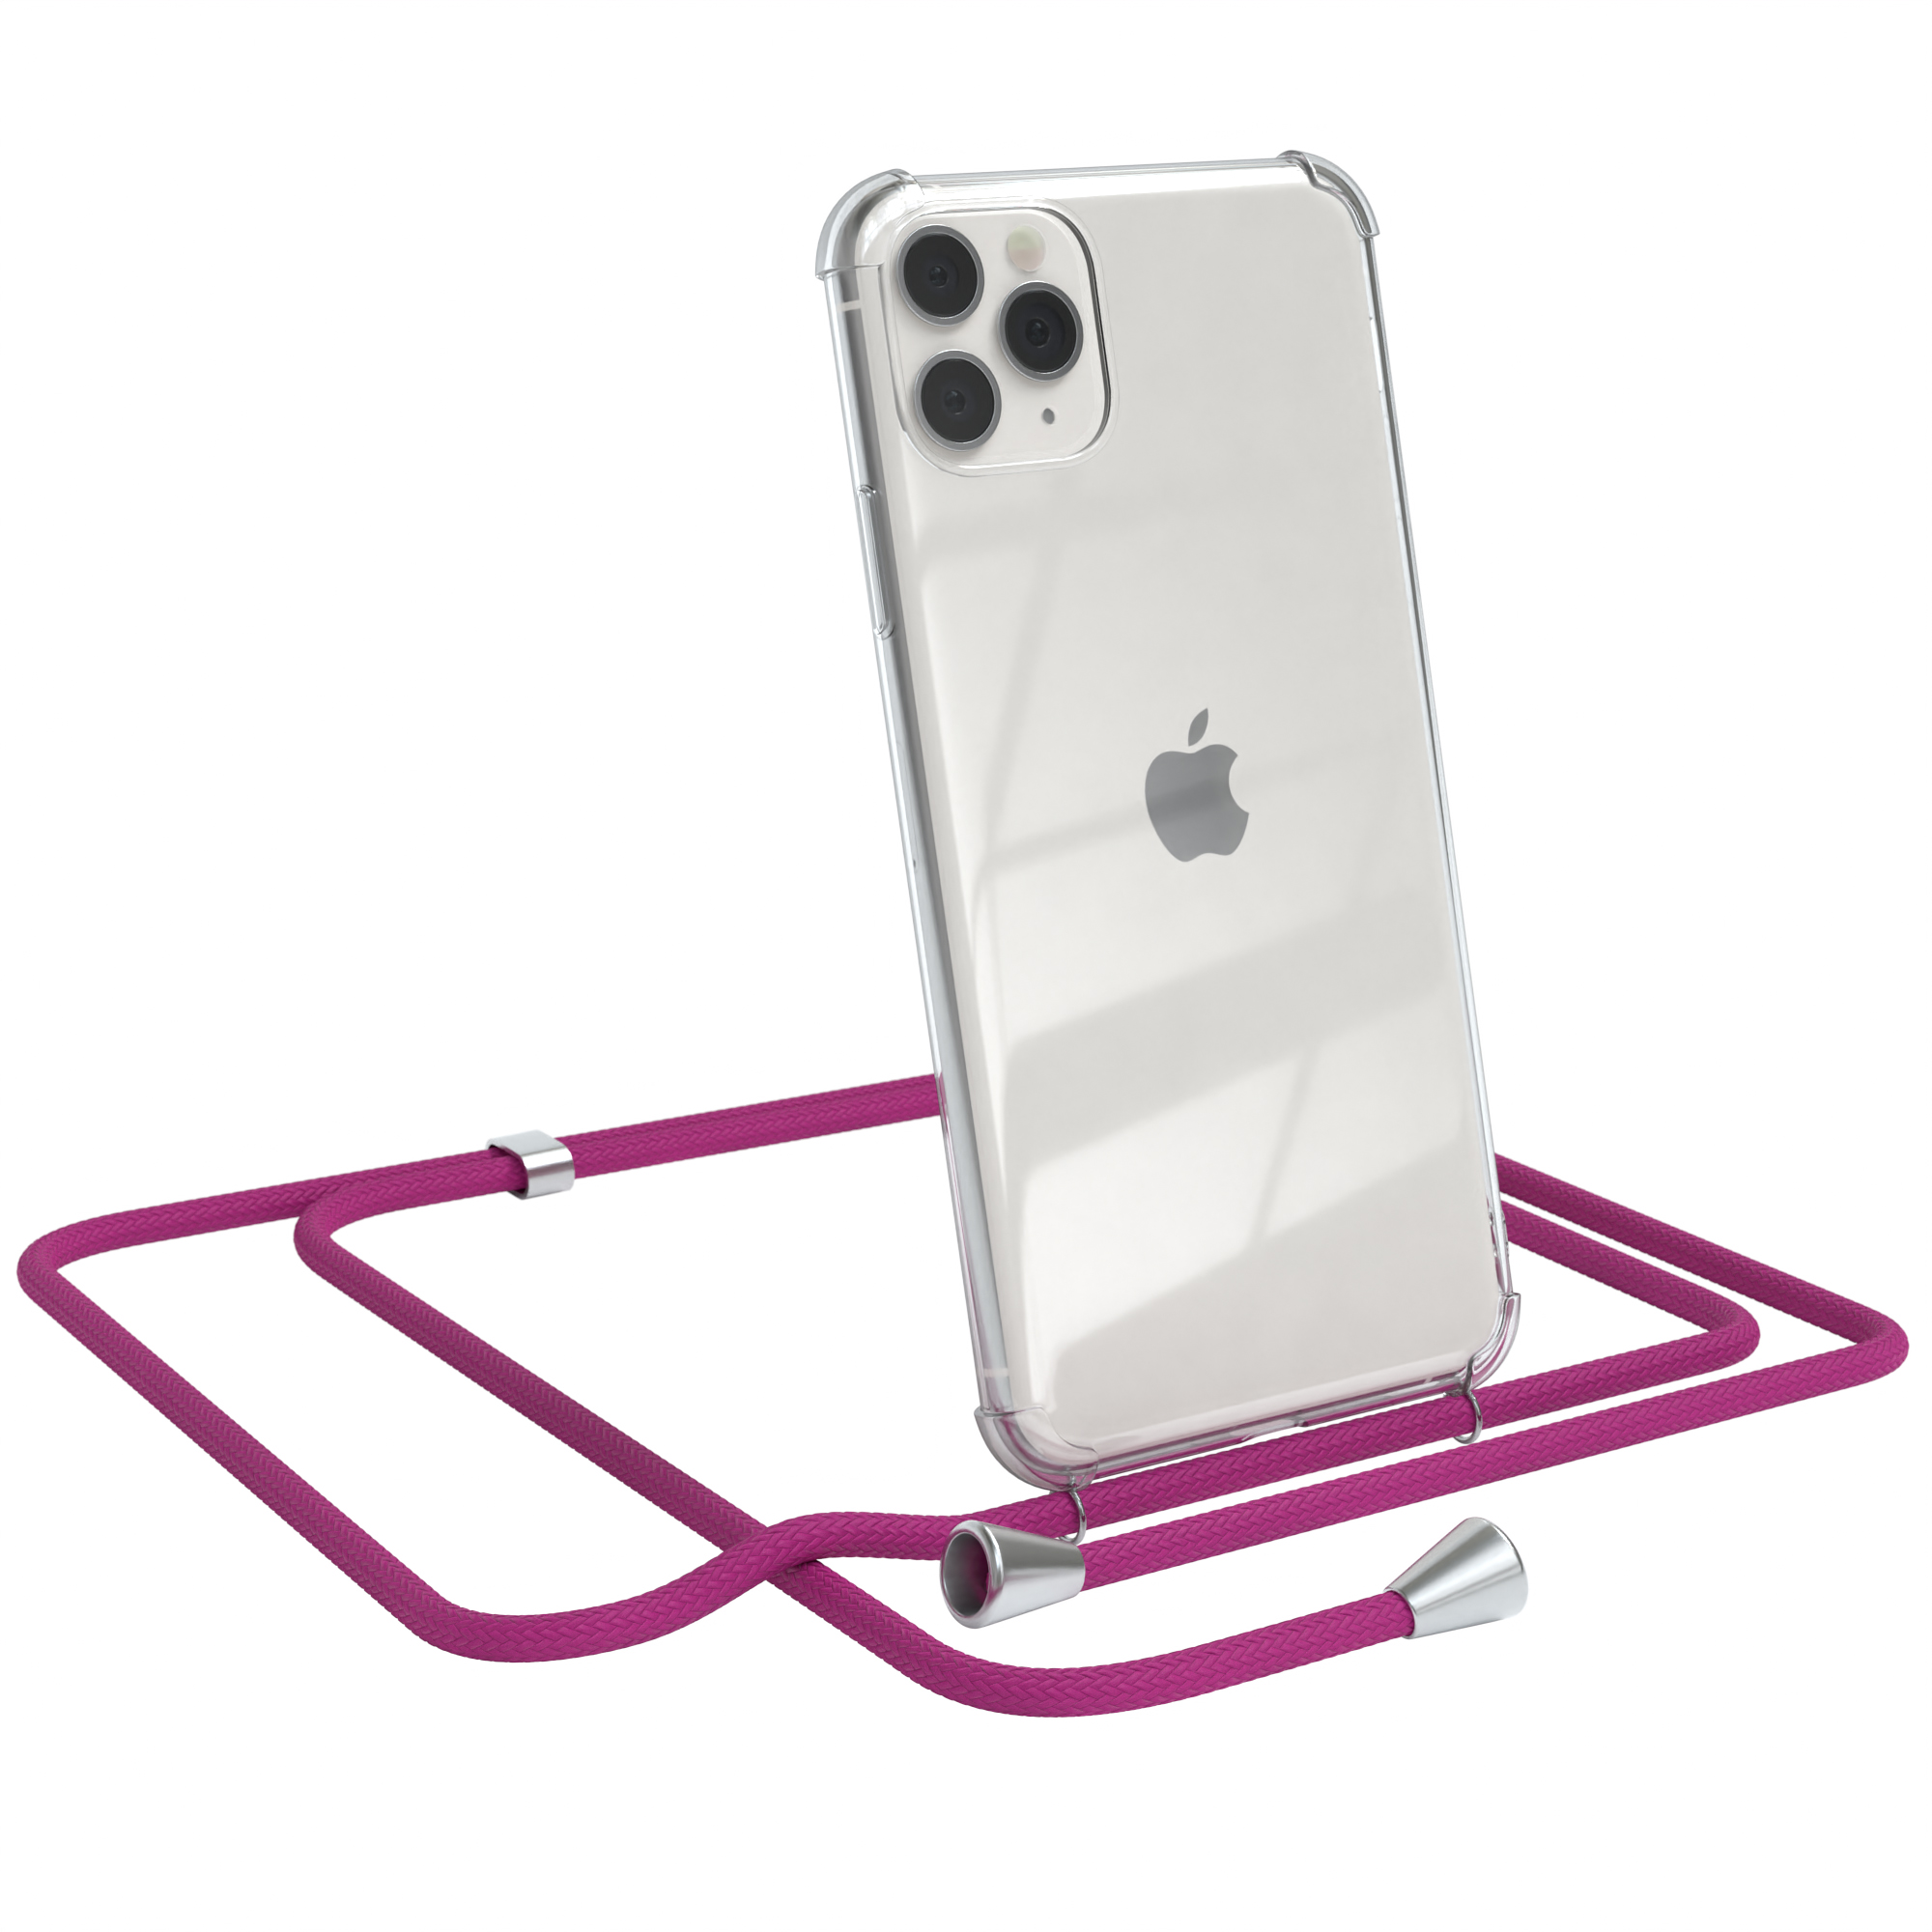 EAZY Clips Silber Max, Chain Pro / CASE iPhone Umhängetasche, Apple, 11 Pink normal,